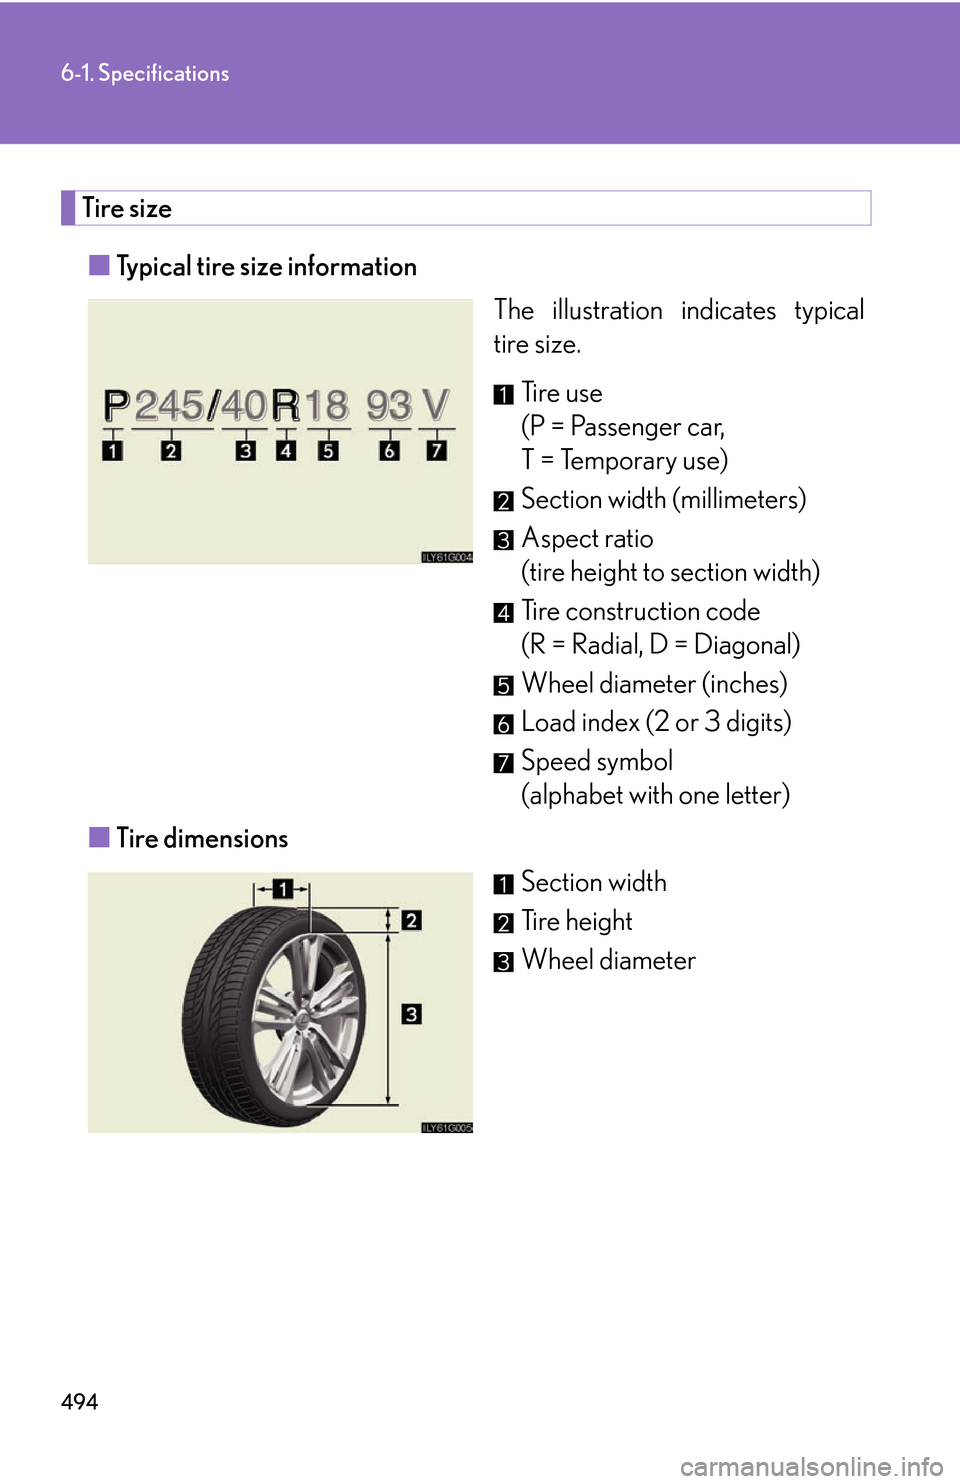 Lexus GS450h 2007  Do-it-yourself maintenance / LEXUS 2007 GS450H THROUGH JUNE 2006 PROD. OWNERS MANUAL (OM30727U) 494
6-1. Specifications
Tire size
■Typical tire size information
The illustration indicates typical 
tir
e size.
Ti r e  u s e 
(P = Passenger car, 
T = Temporary use)
Section width (millimete